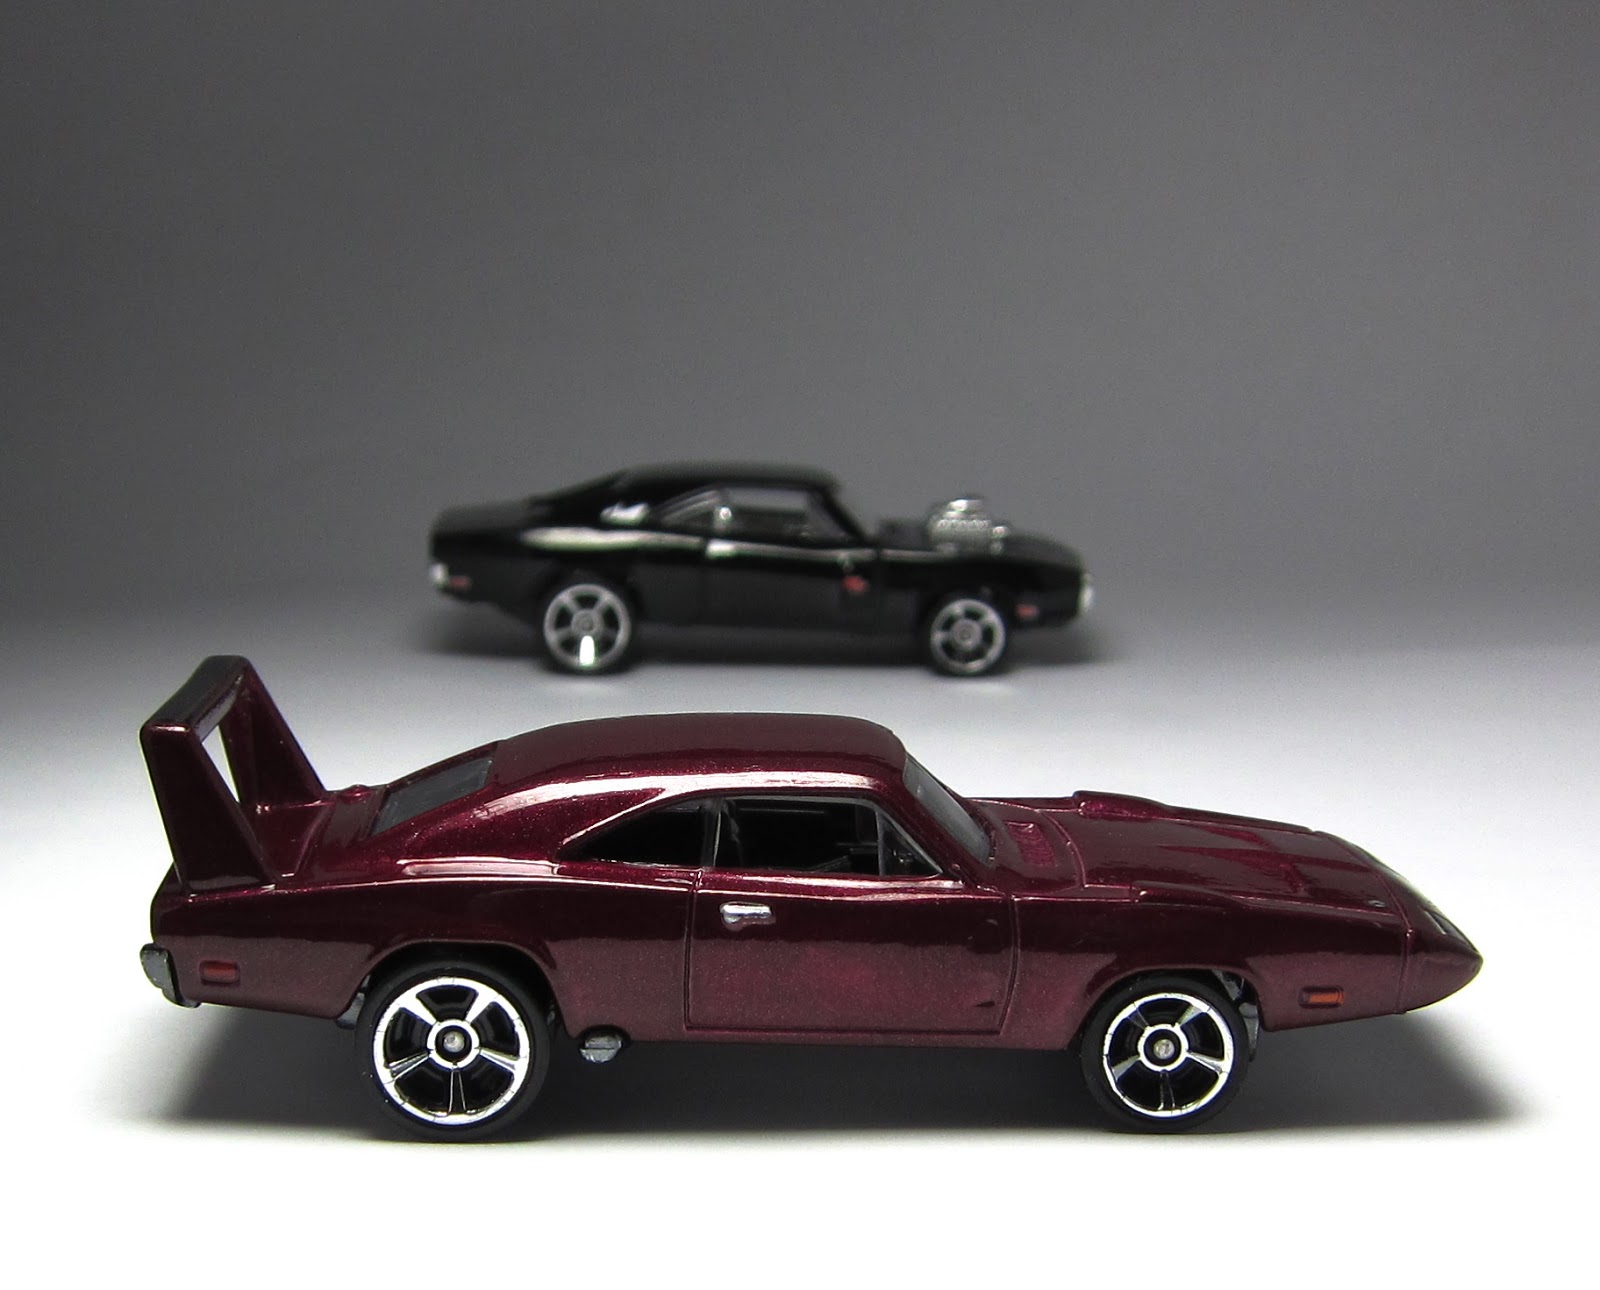 1968, Dodge, Charger, Daytona, Fast, Furious, 6, Muscle, Classic, Hot, Rod, Rods, Movie, Movies, Toy, Toys, Hotwheels, R, Jpg Wallpaper